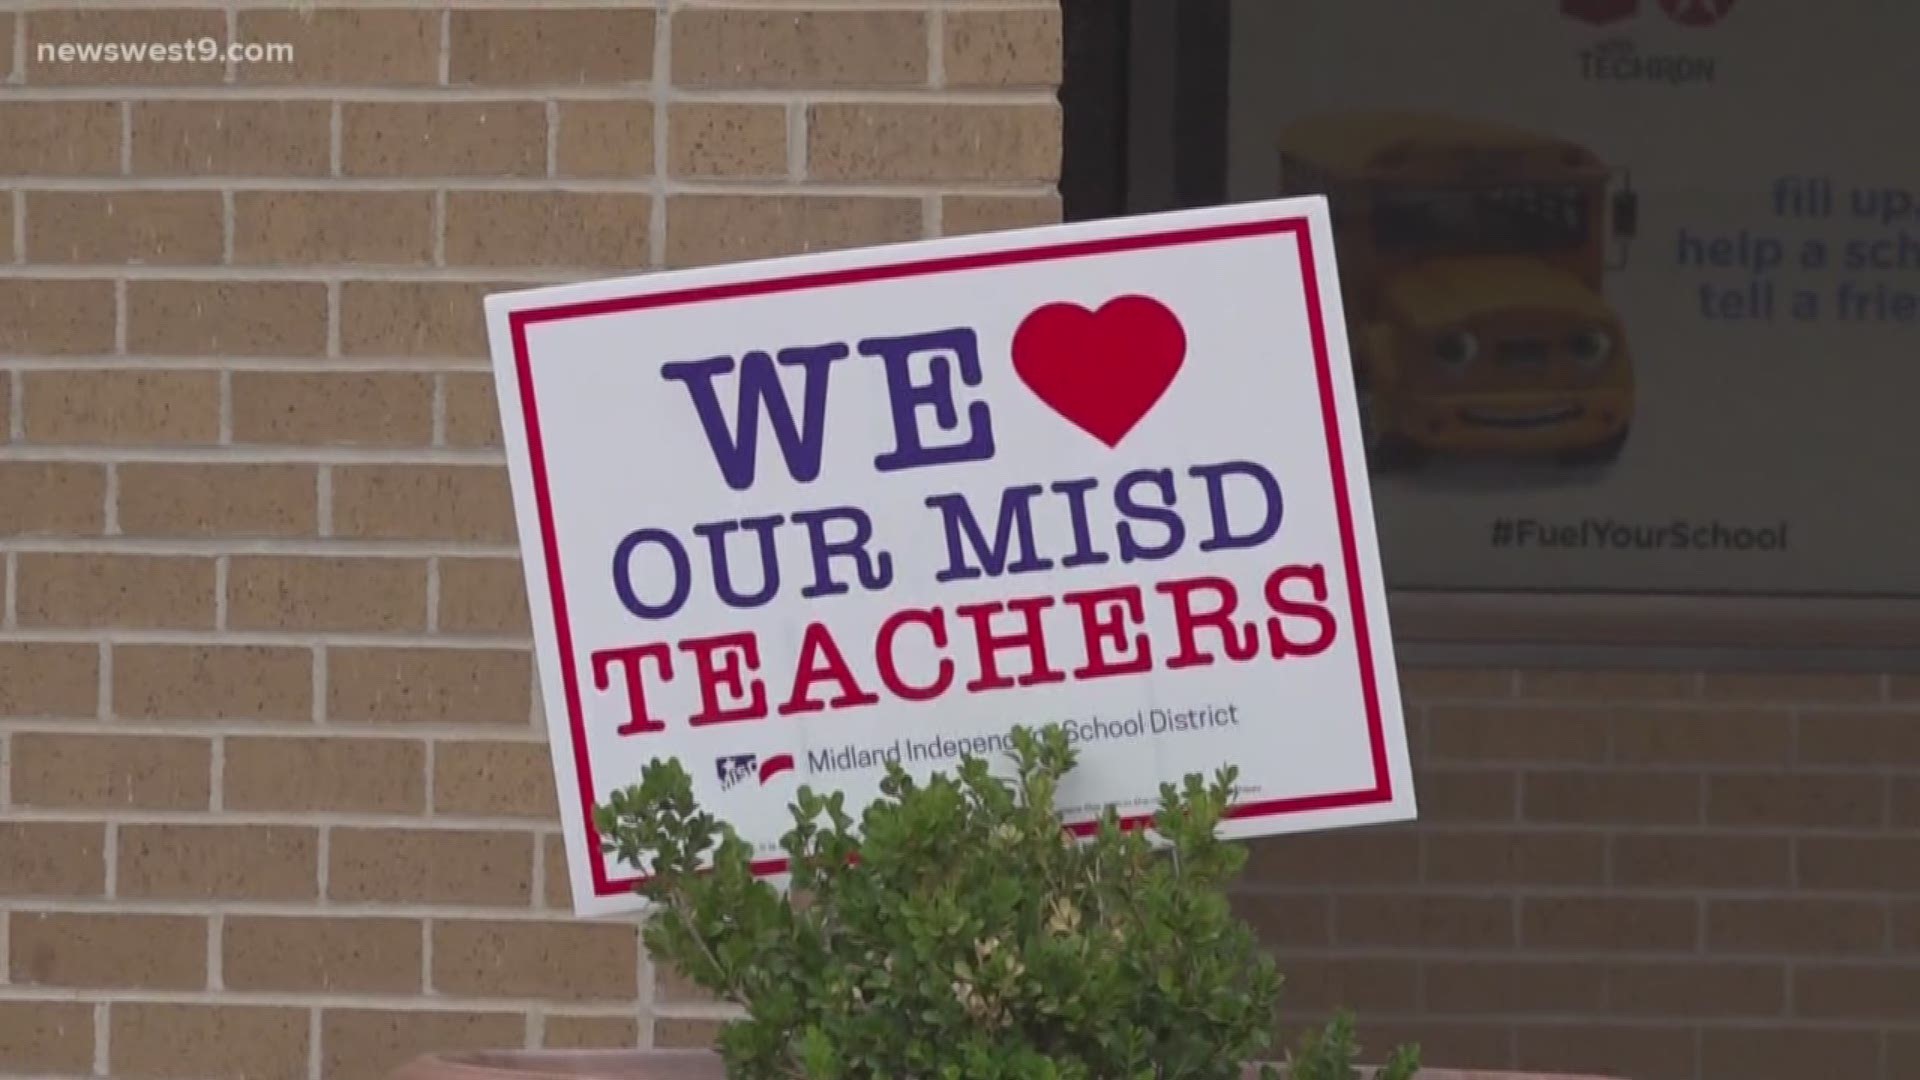 MISD is looking for input from families and teachers in the district about potential changes to upcoming school year.